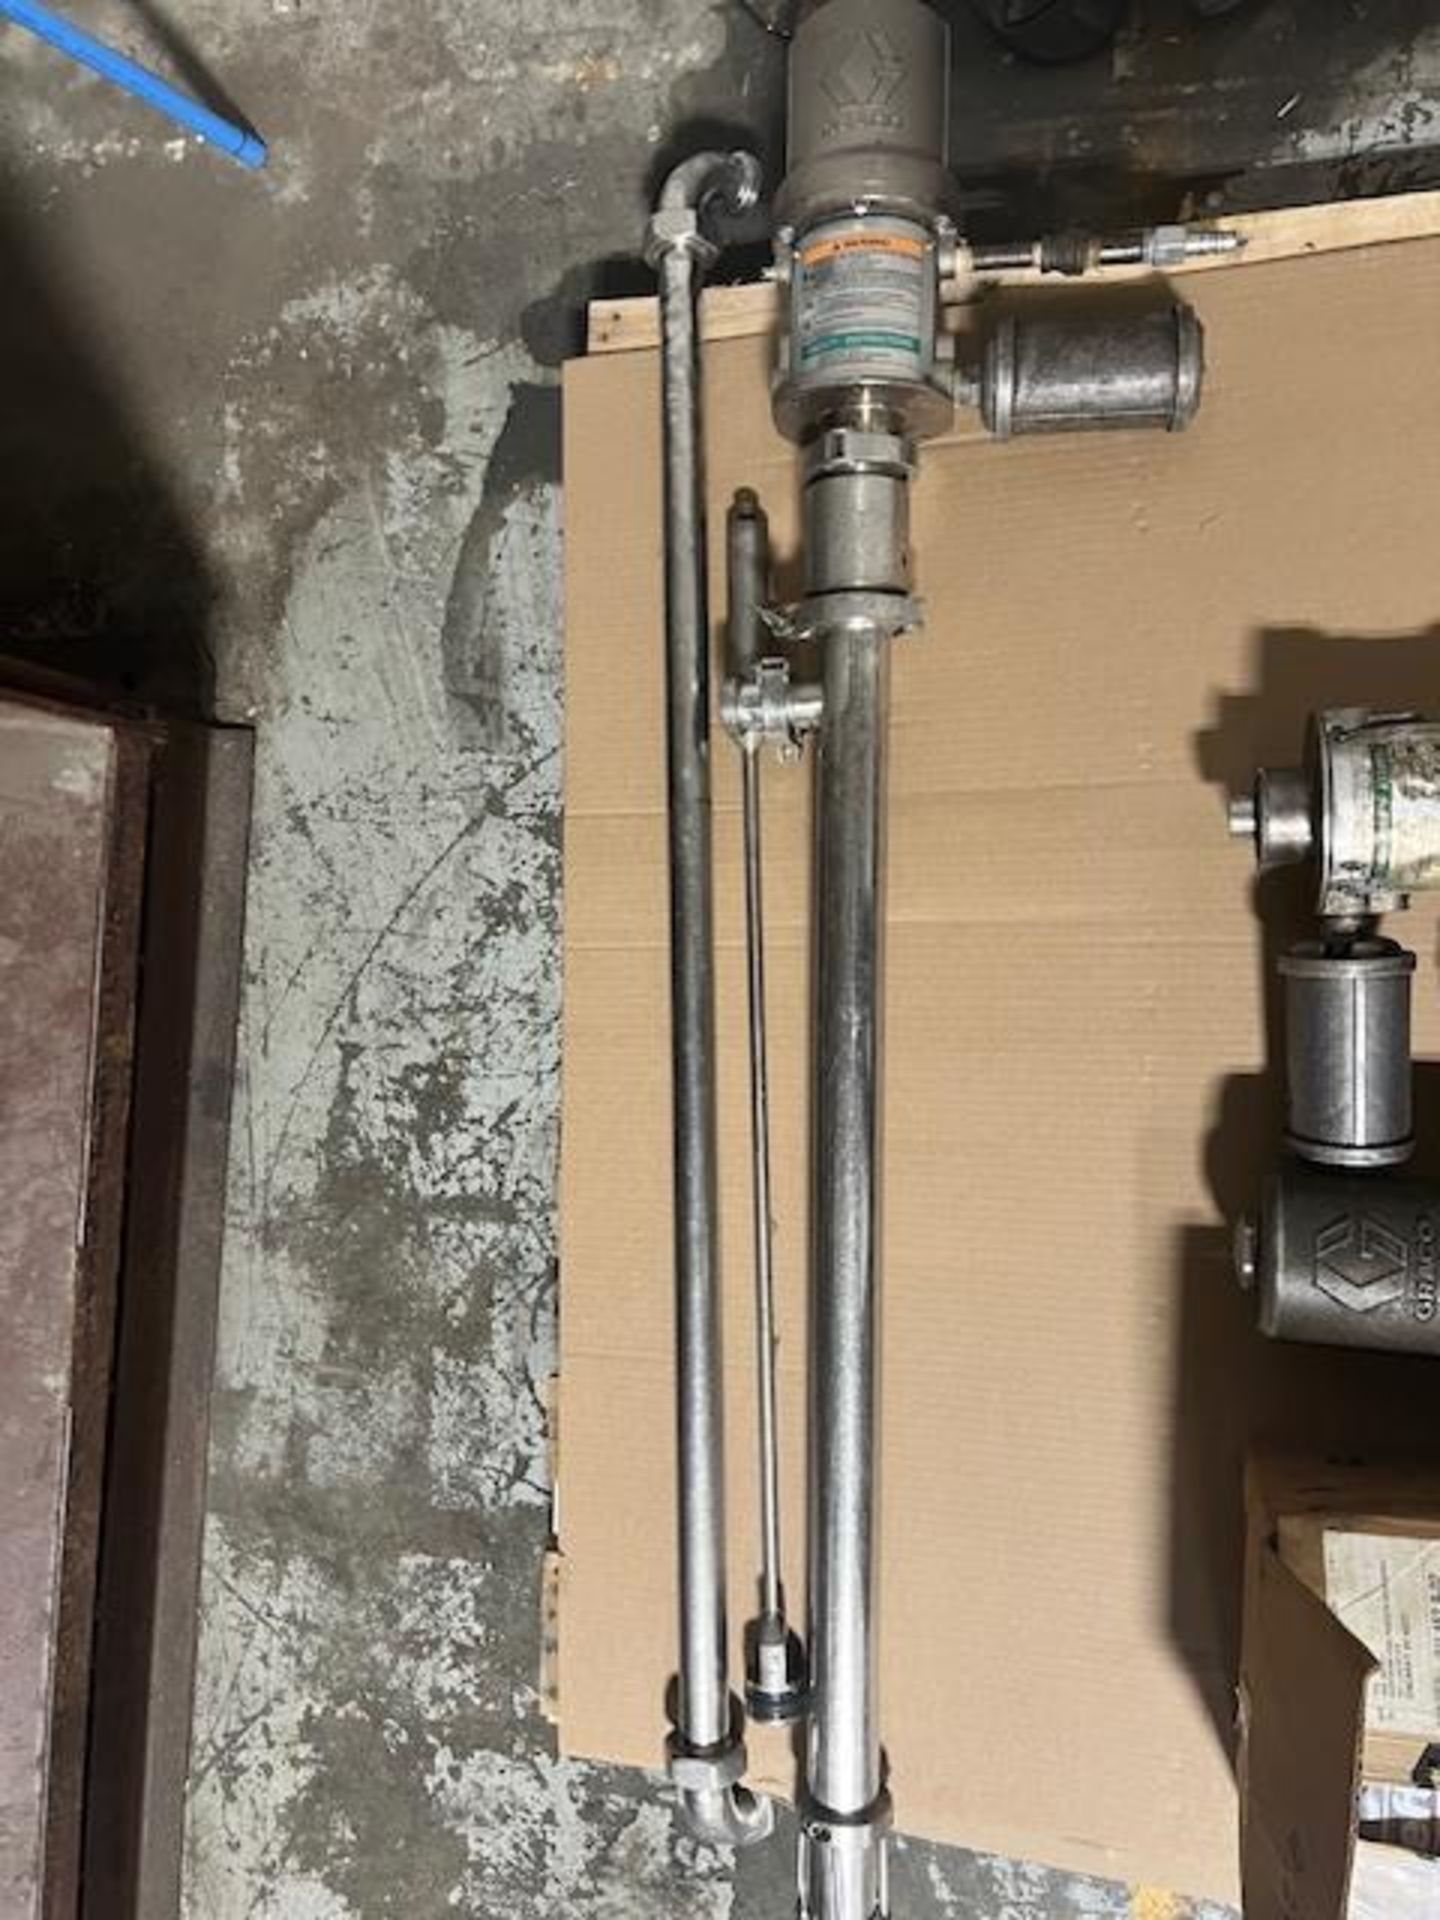 Greco Monark Drump Pump - Newer Head with Spare Road Pistons and Additional (2) Spare Heads,